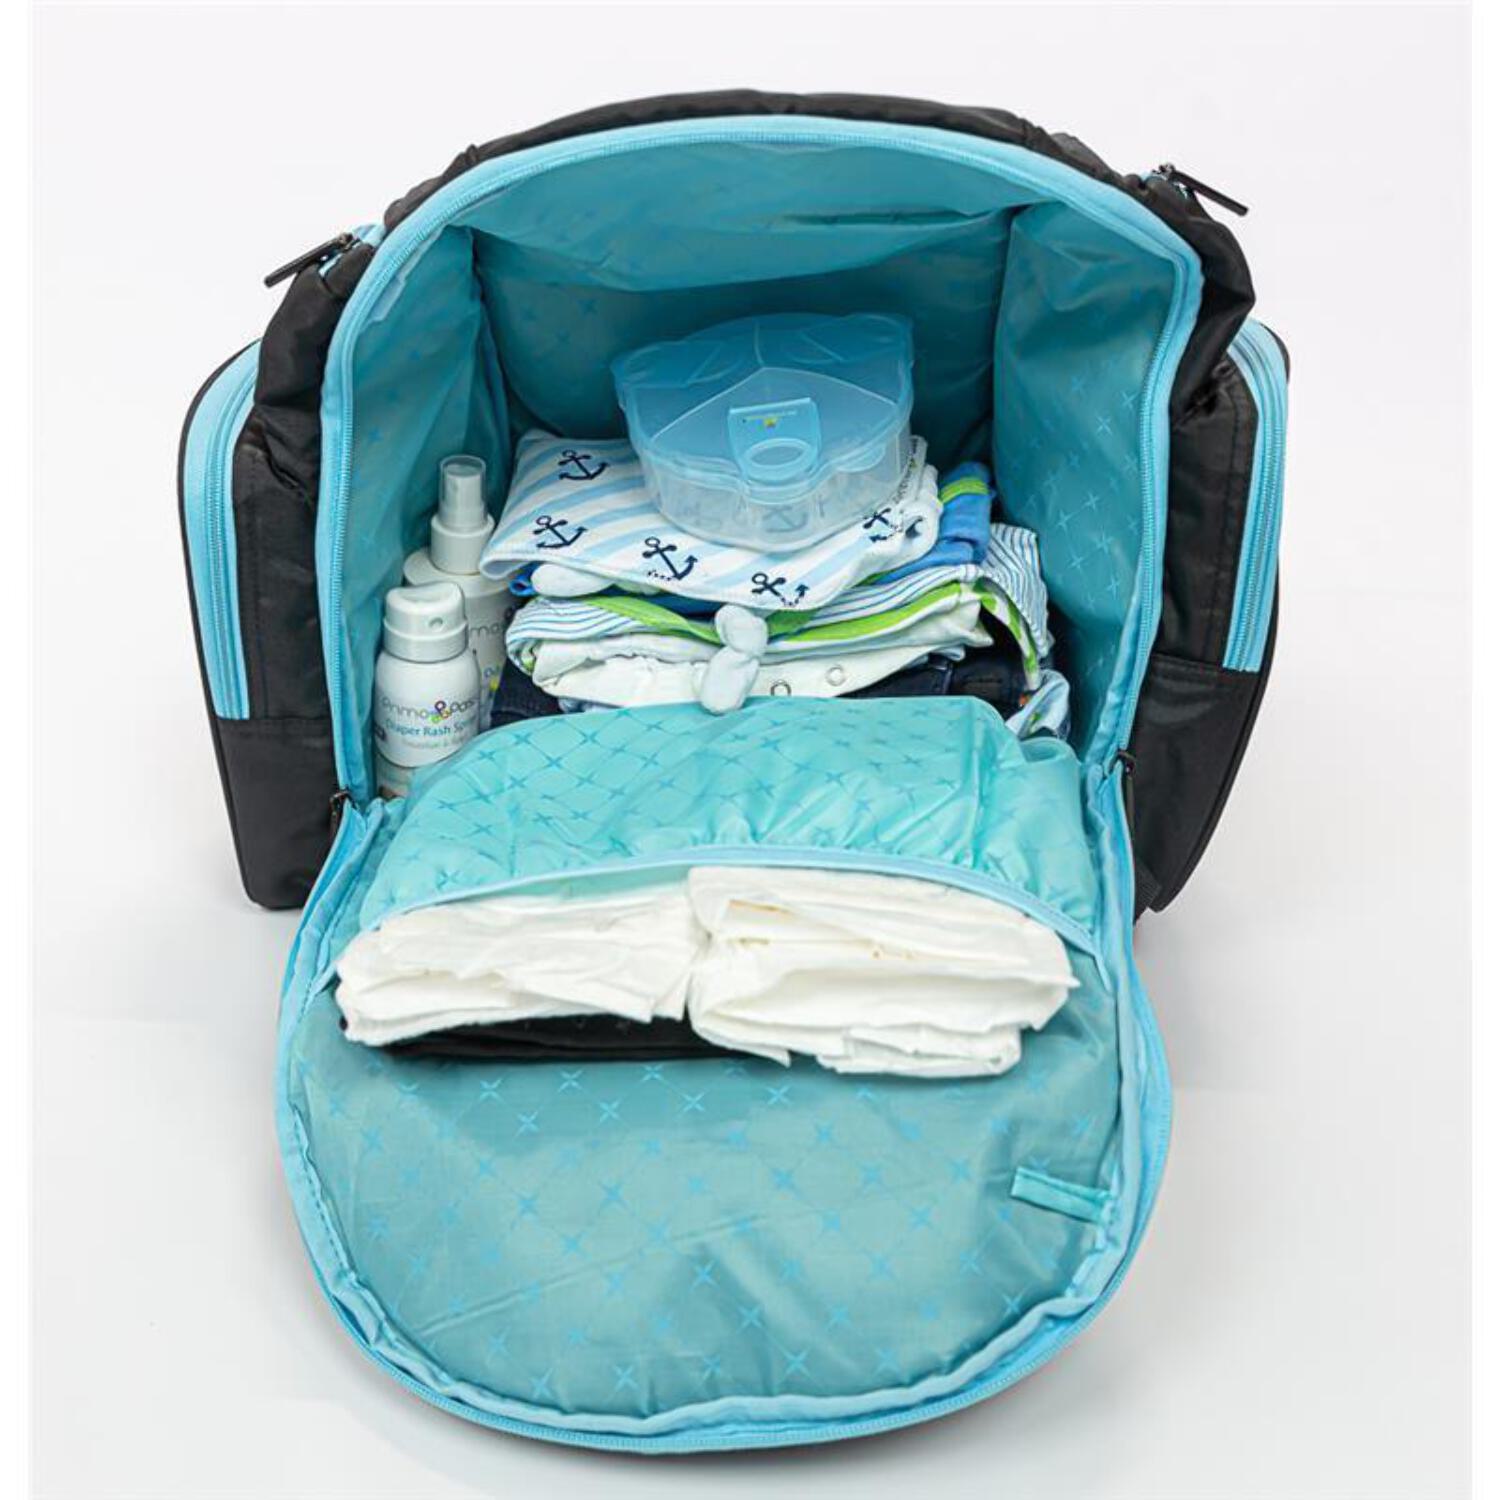 Primo Passi - Blue Backpack Diaper Bag - image 4 of 9